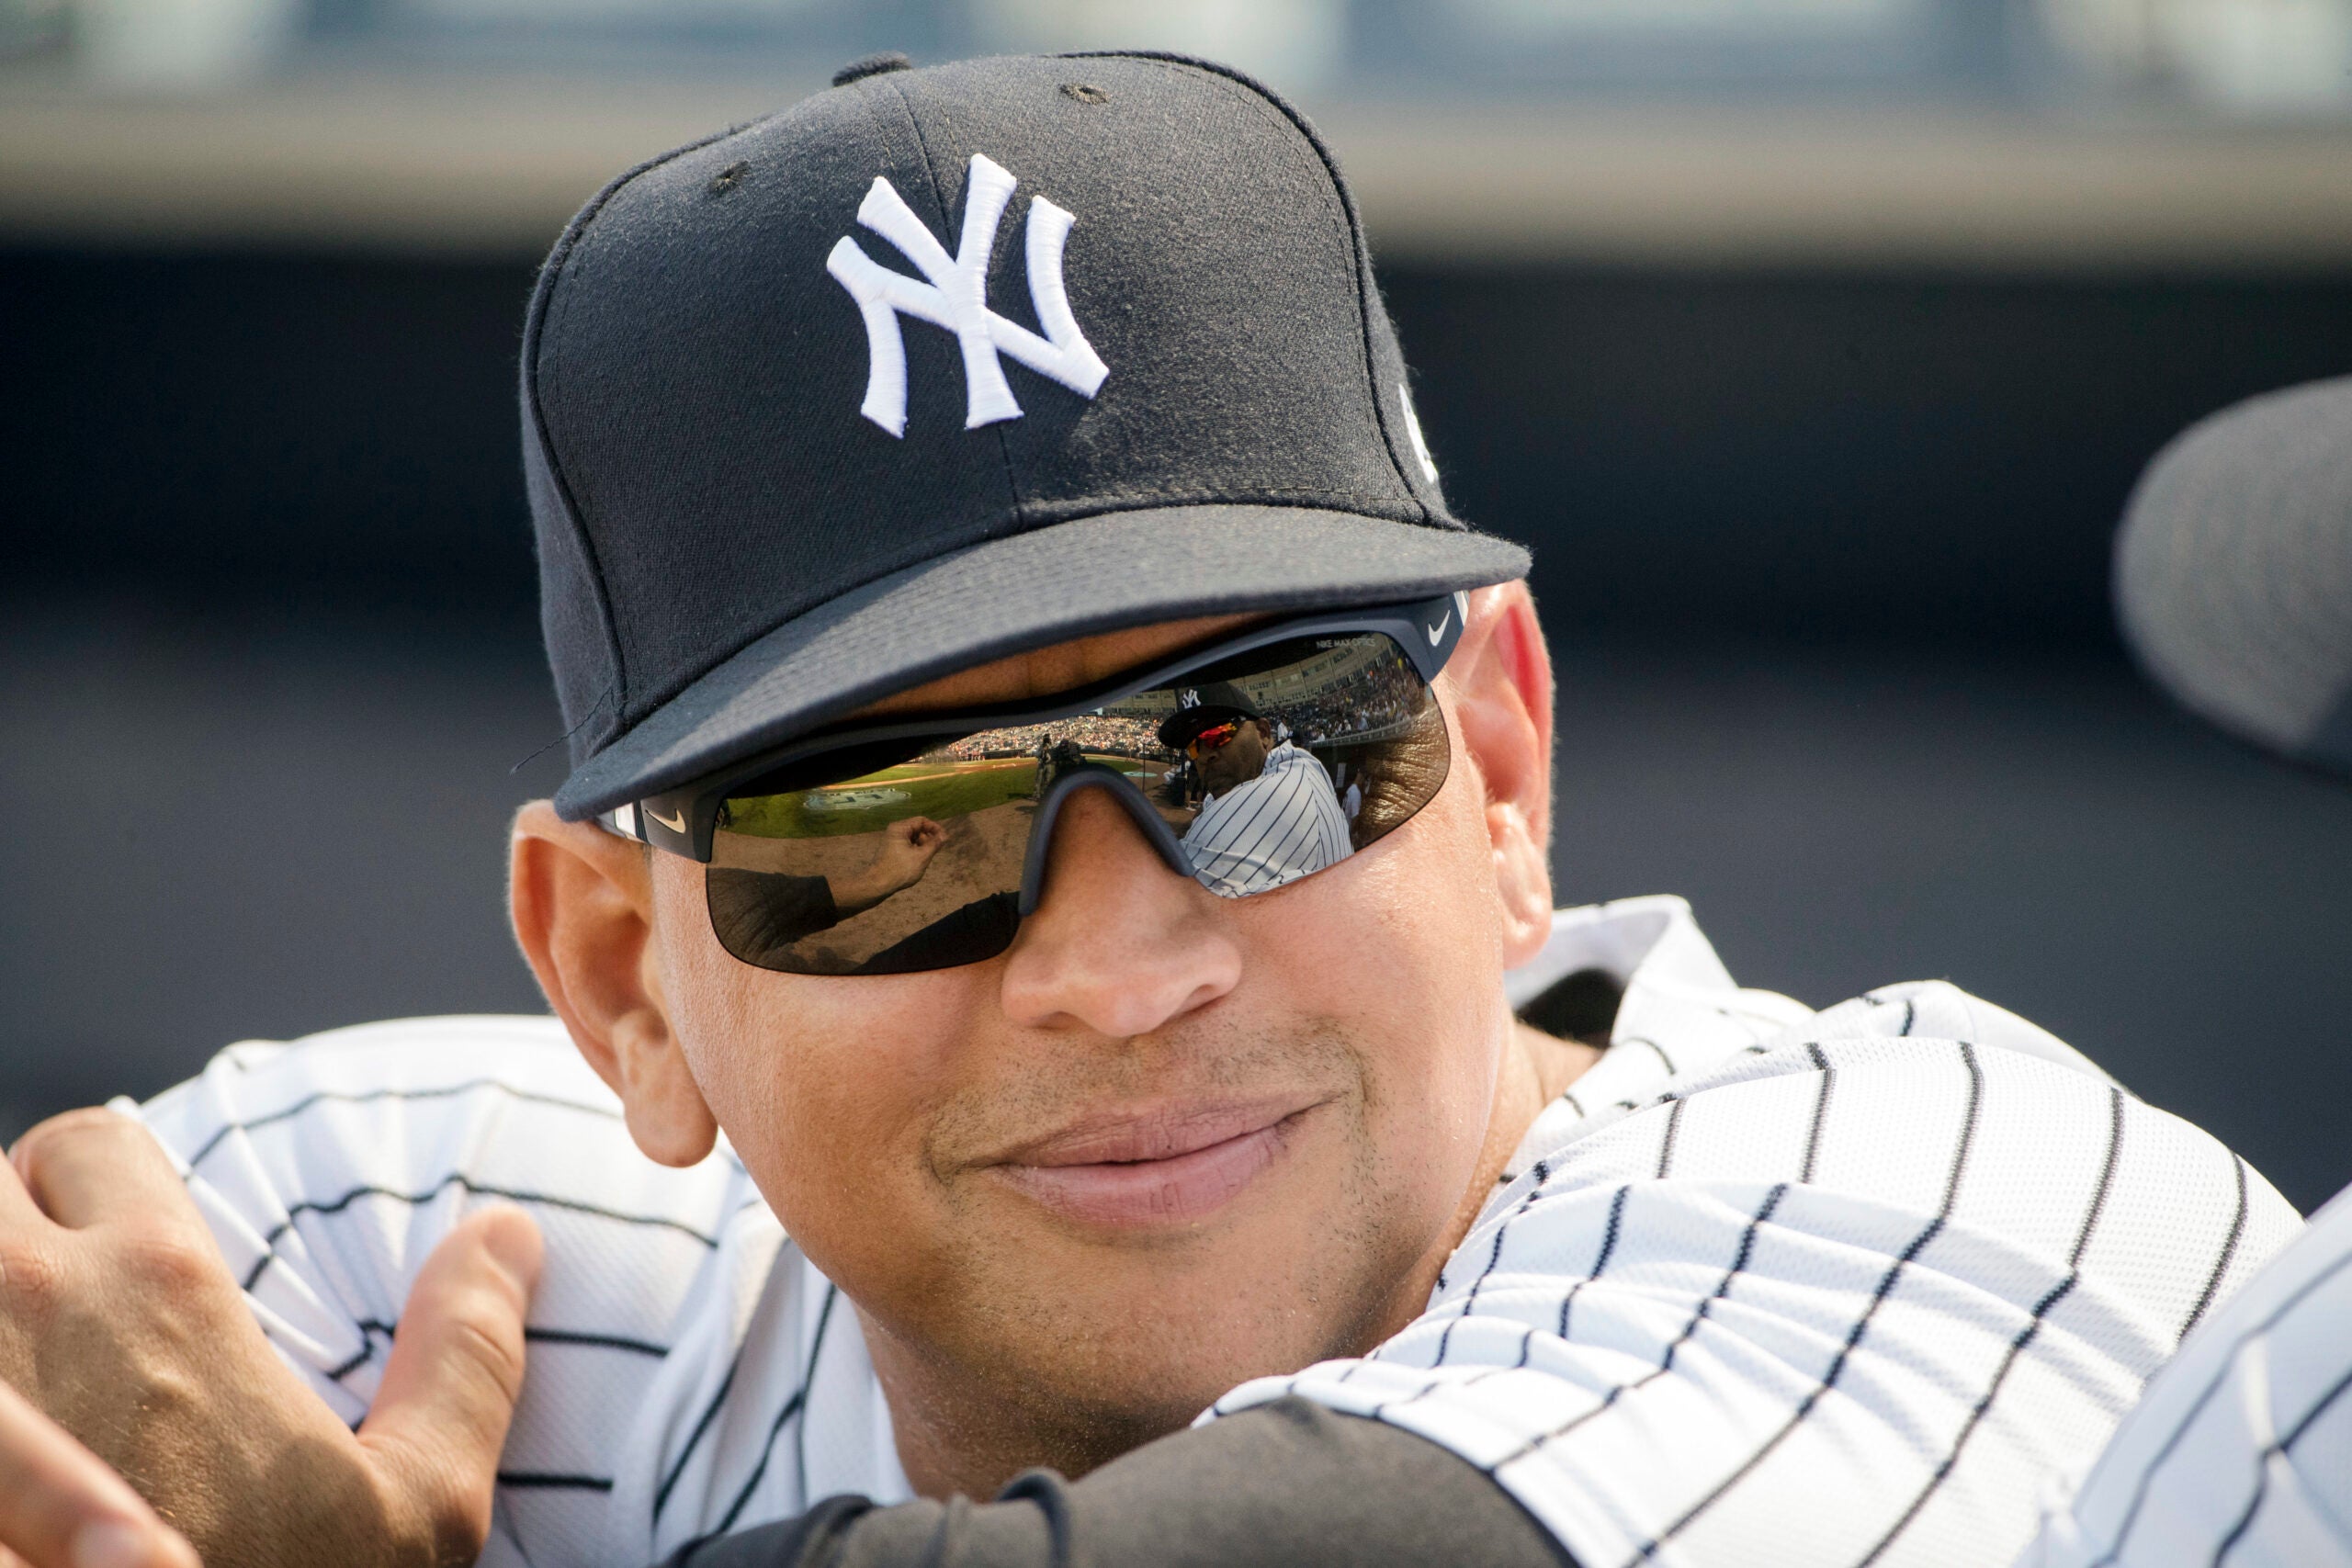 Alex Rodriguez works at Wahlburgers after losing a Red Sox bet to